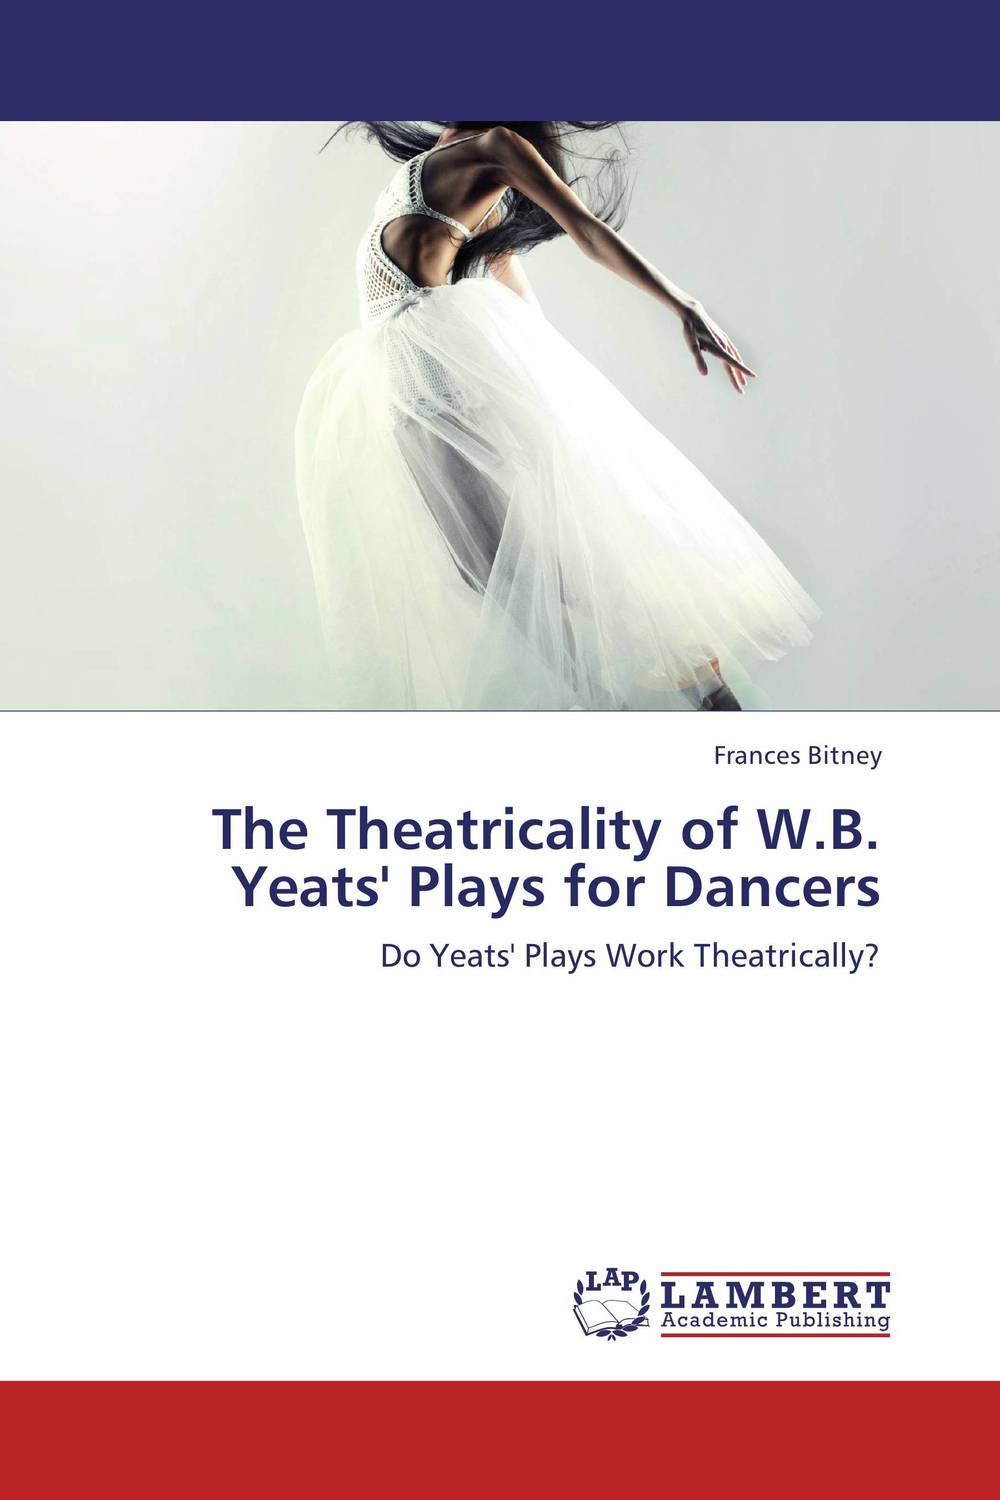 The Theatricality of W.B. Yeats' Plays for Dancers